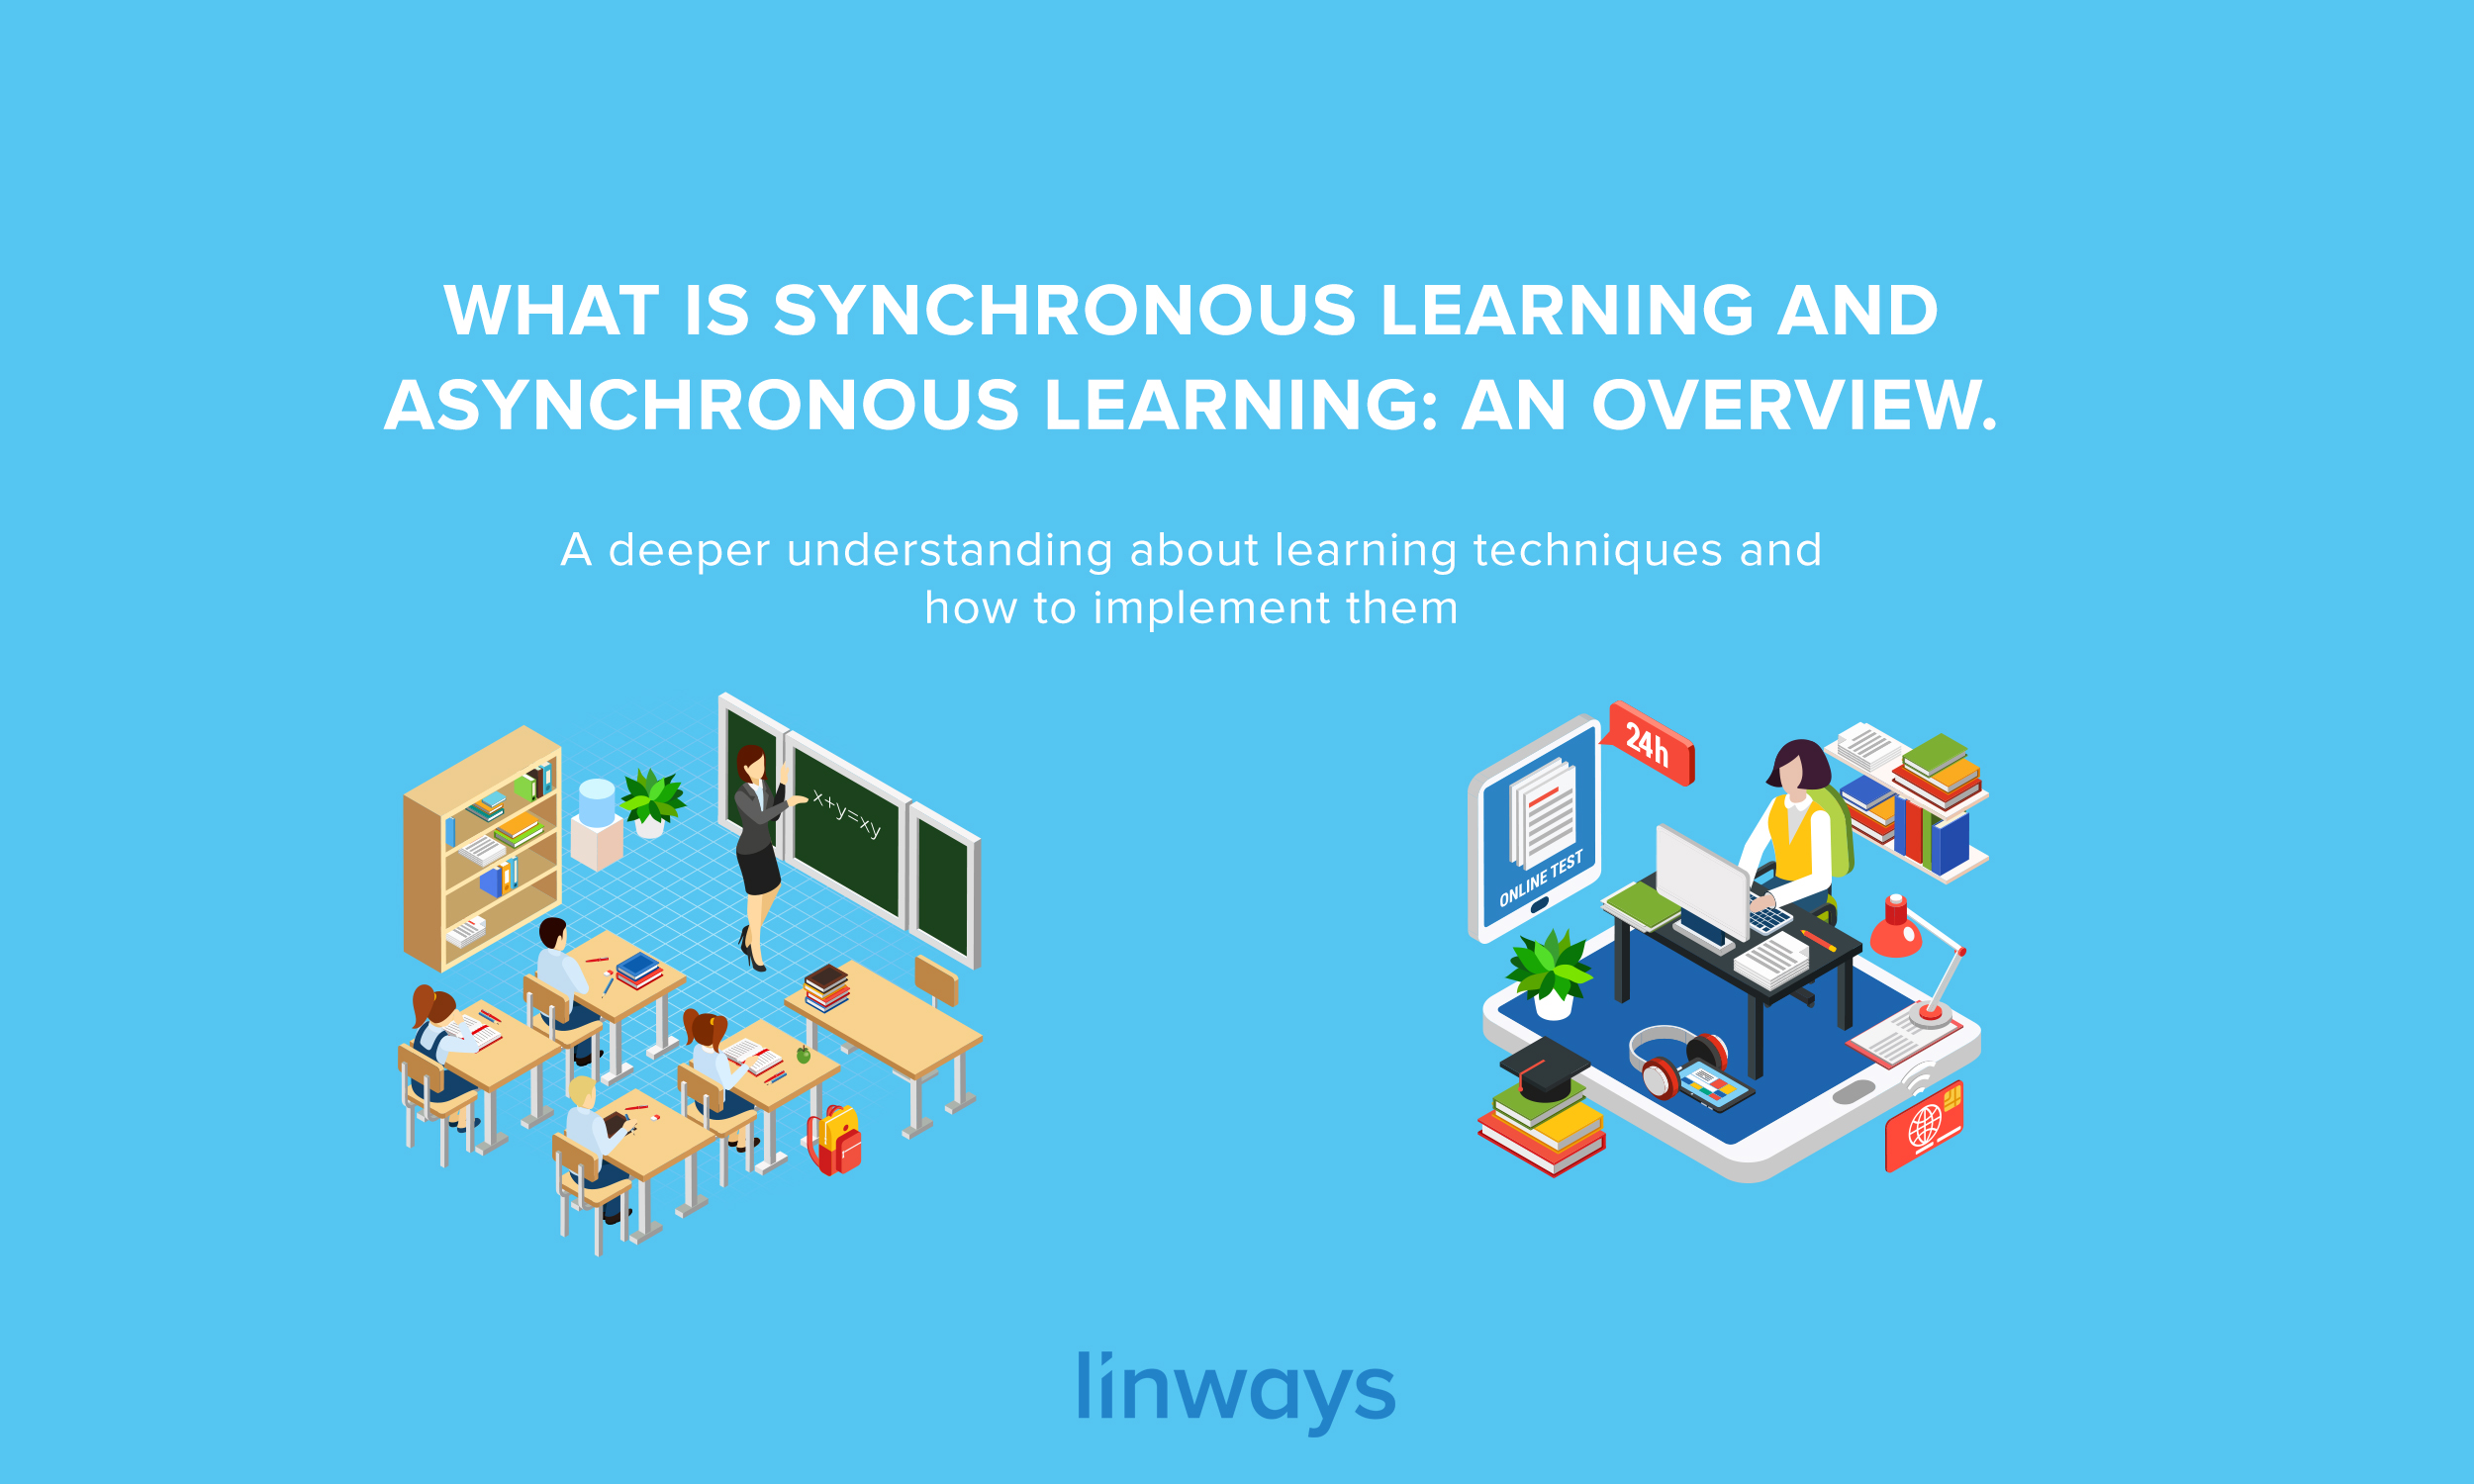 What does synchronous online learning provides?